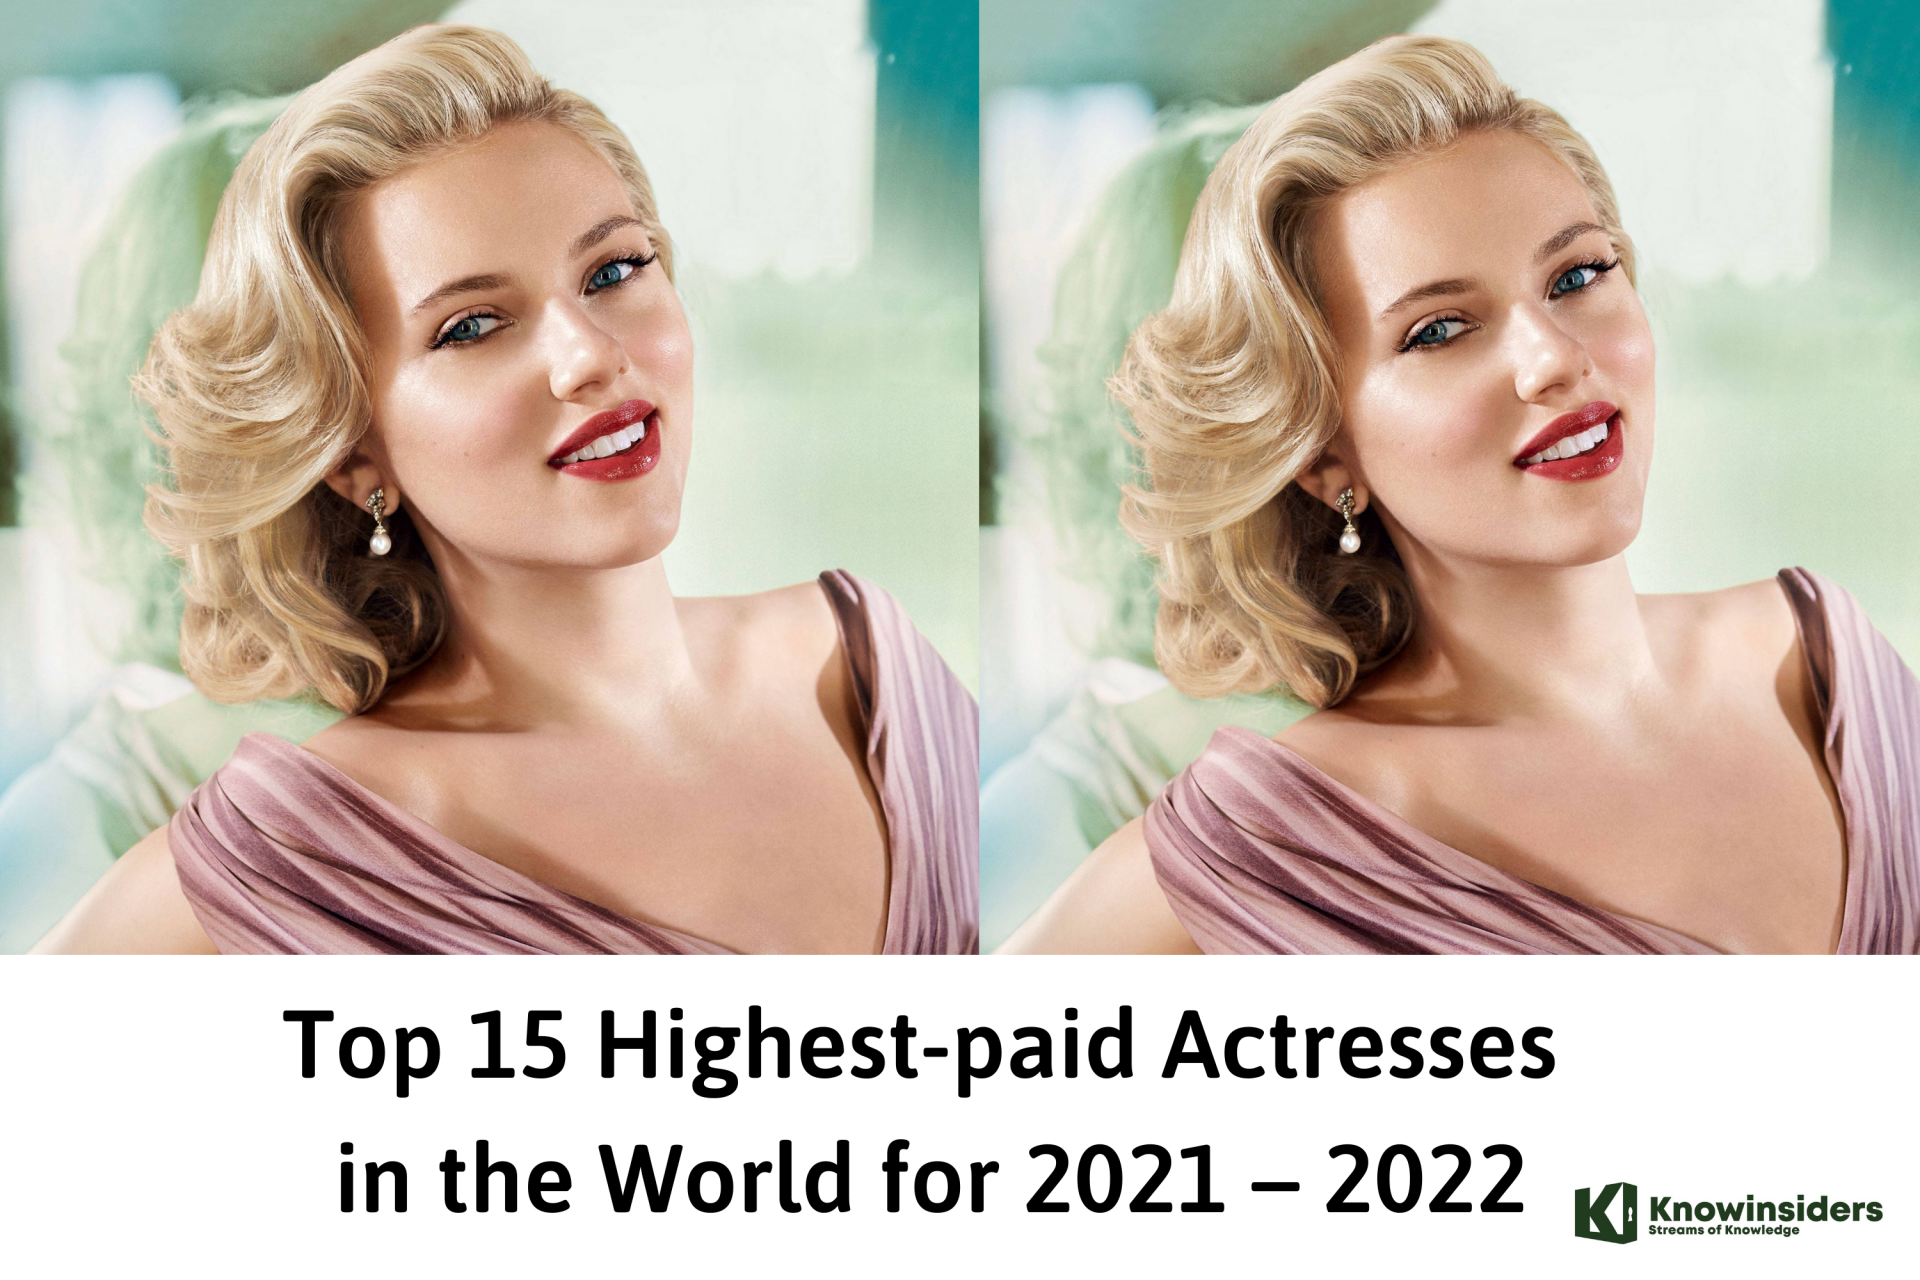 Top 15 Highest-paid Actresses in the World for 2021 – 2022